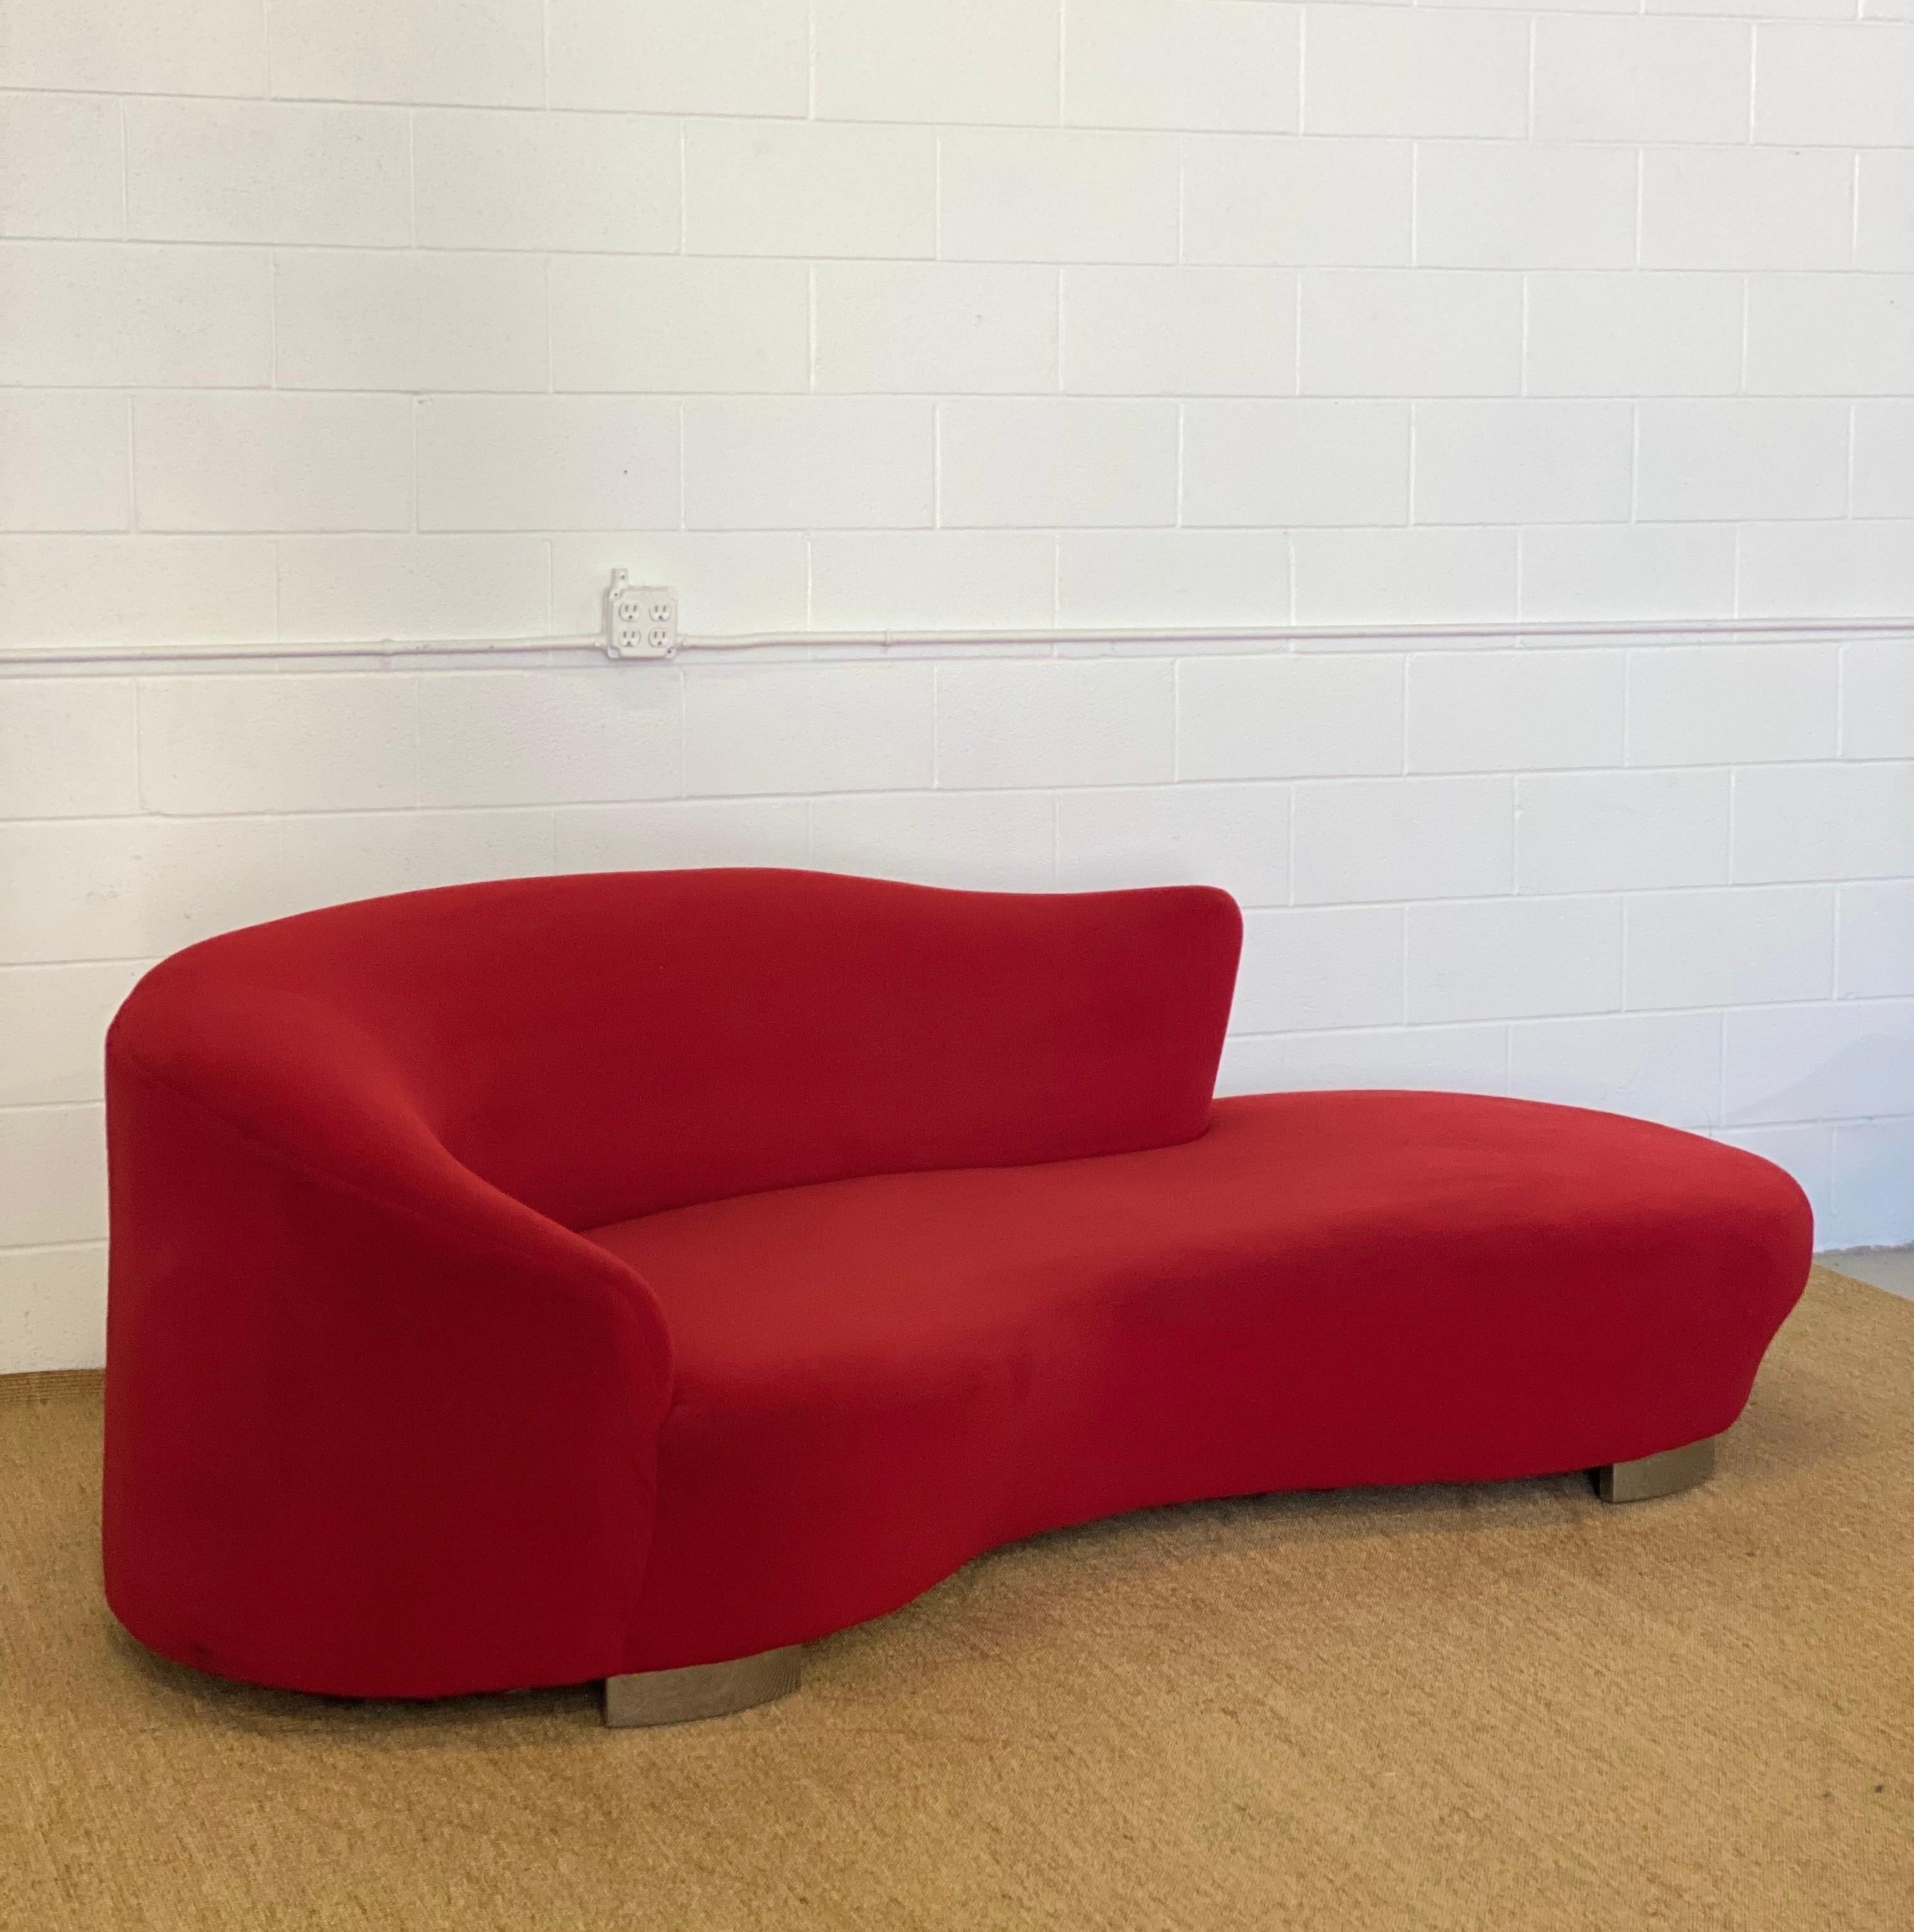 Late 20th Century 1980s Vintage Curved Cloud Red Sofa For Sale